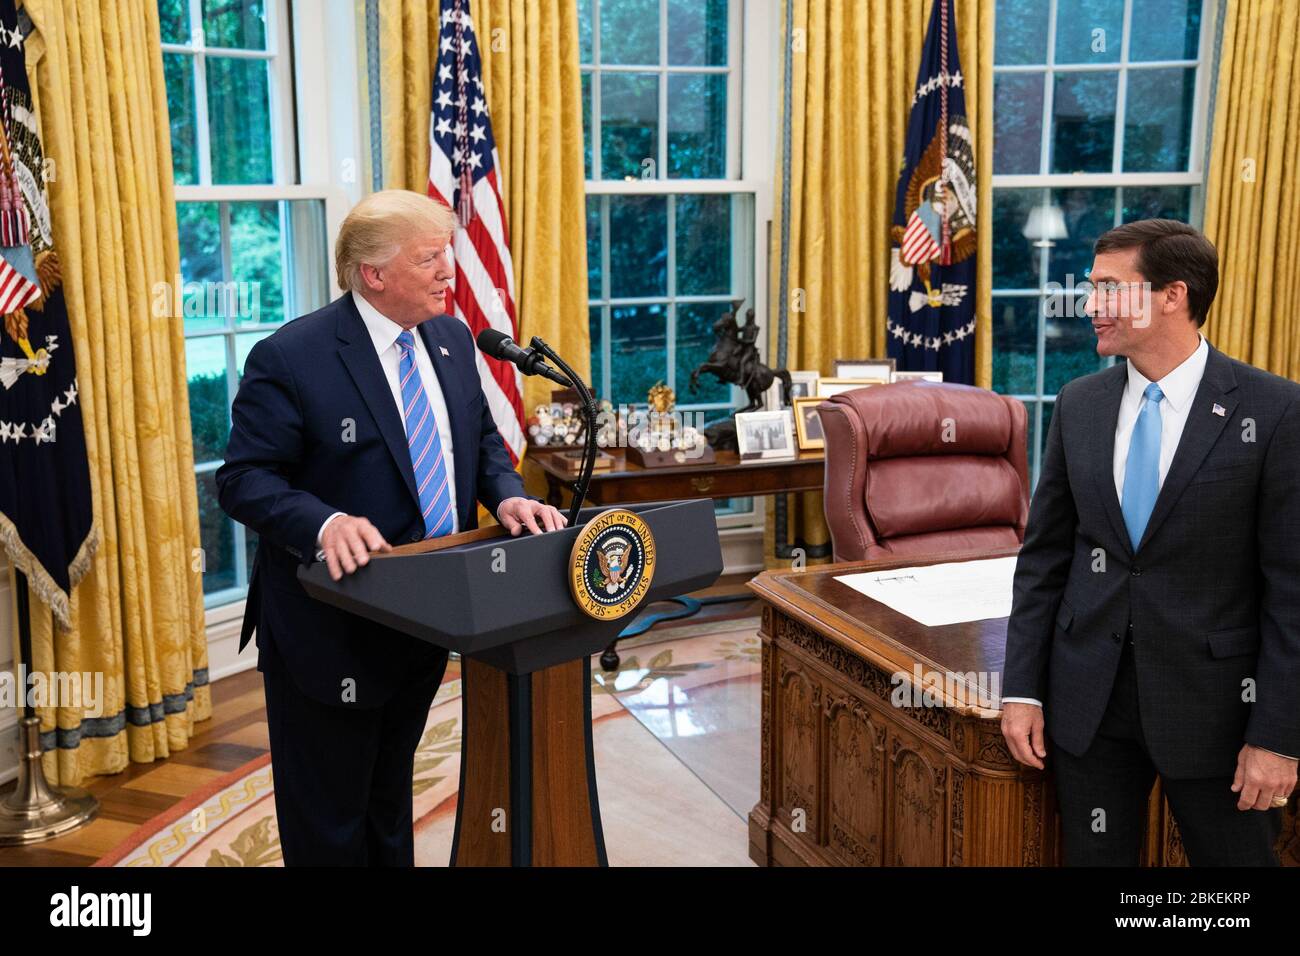 President Donald J. Trump addresses his remarks at the swearing-in ceremony for new Secretary of Defense Mark Esper on Tuesday, July 23, 2019, in the Oval Office of the White House. Swearing-in Ceremony for Secretary of Defense Mark Esper Stock Photo